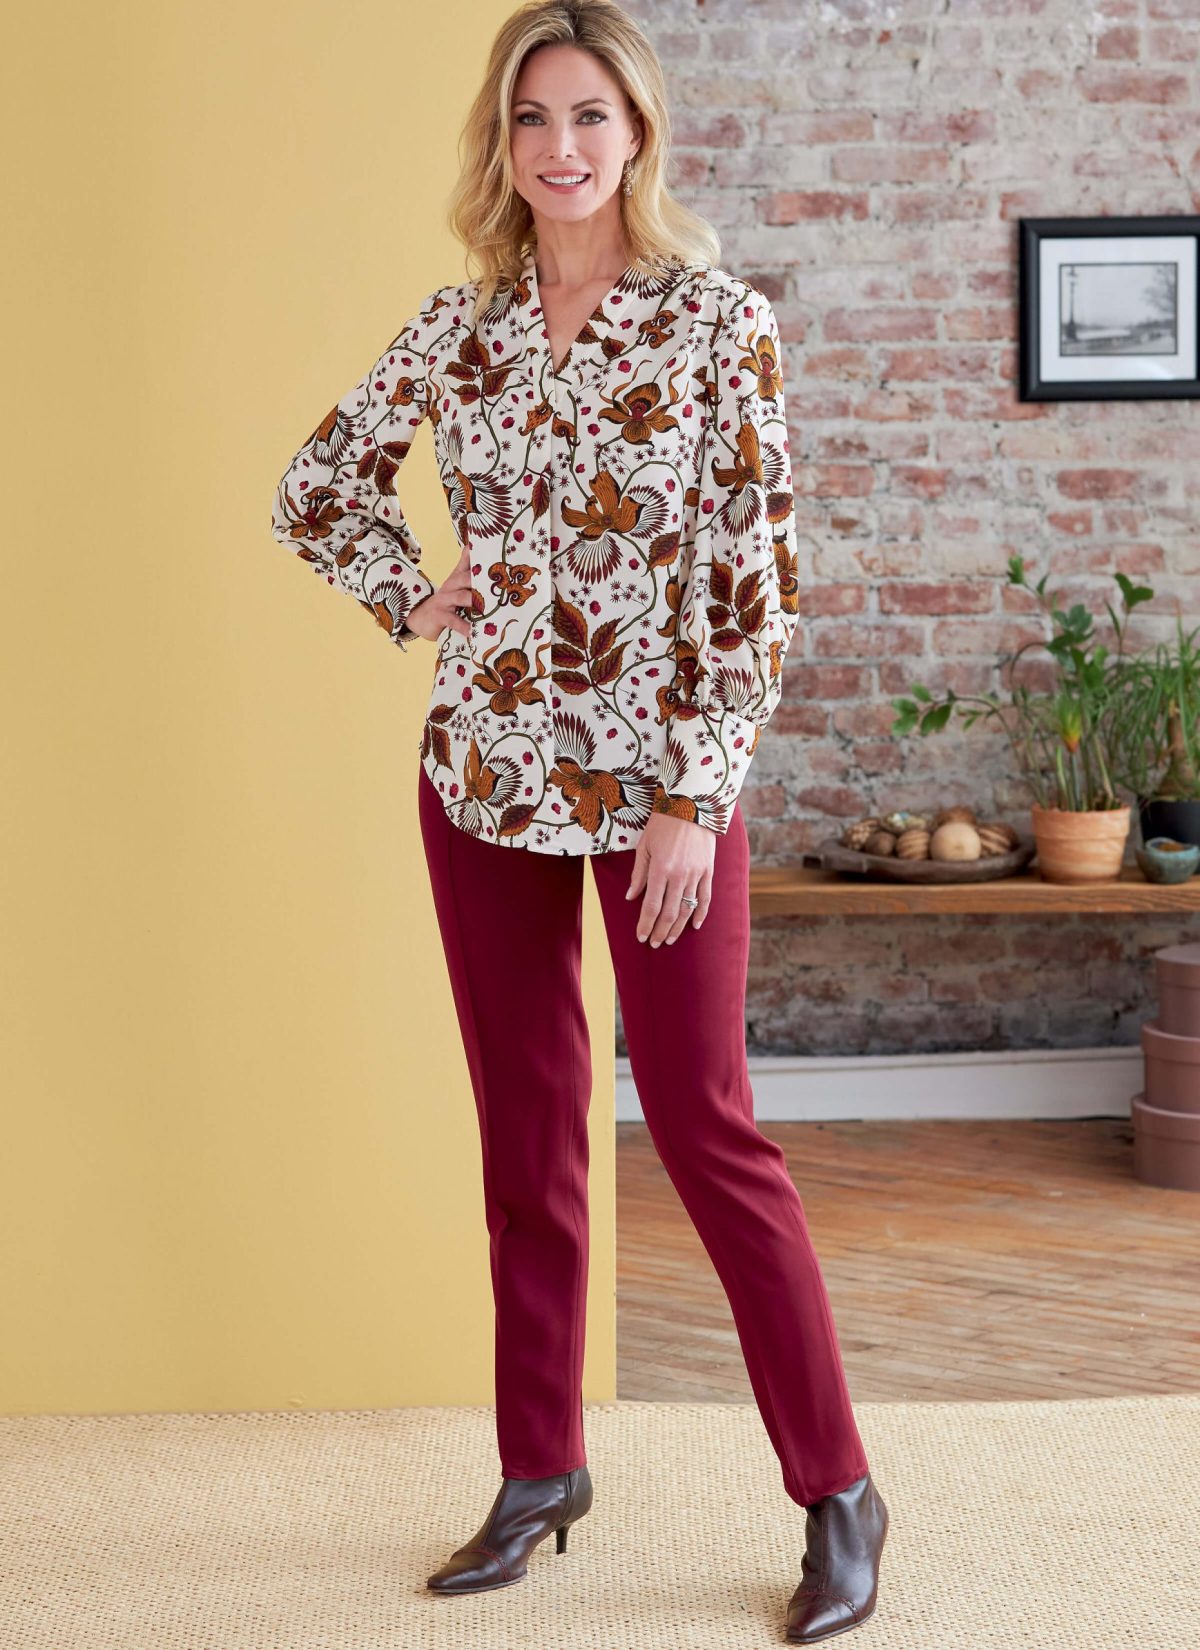 Butterick Sewing Pattern B6855 Misses' Top